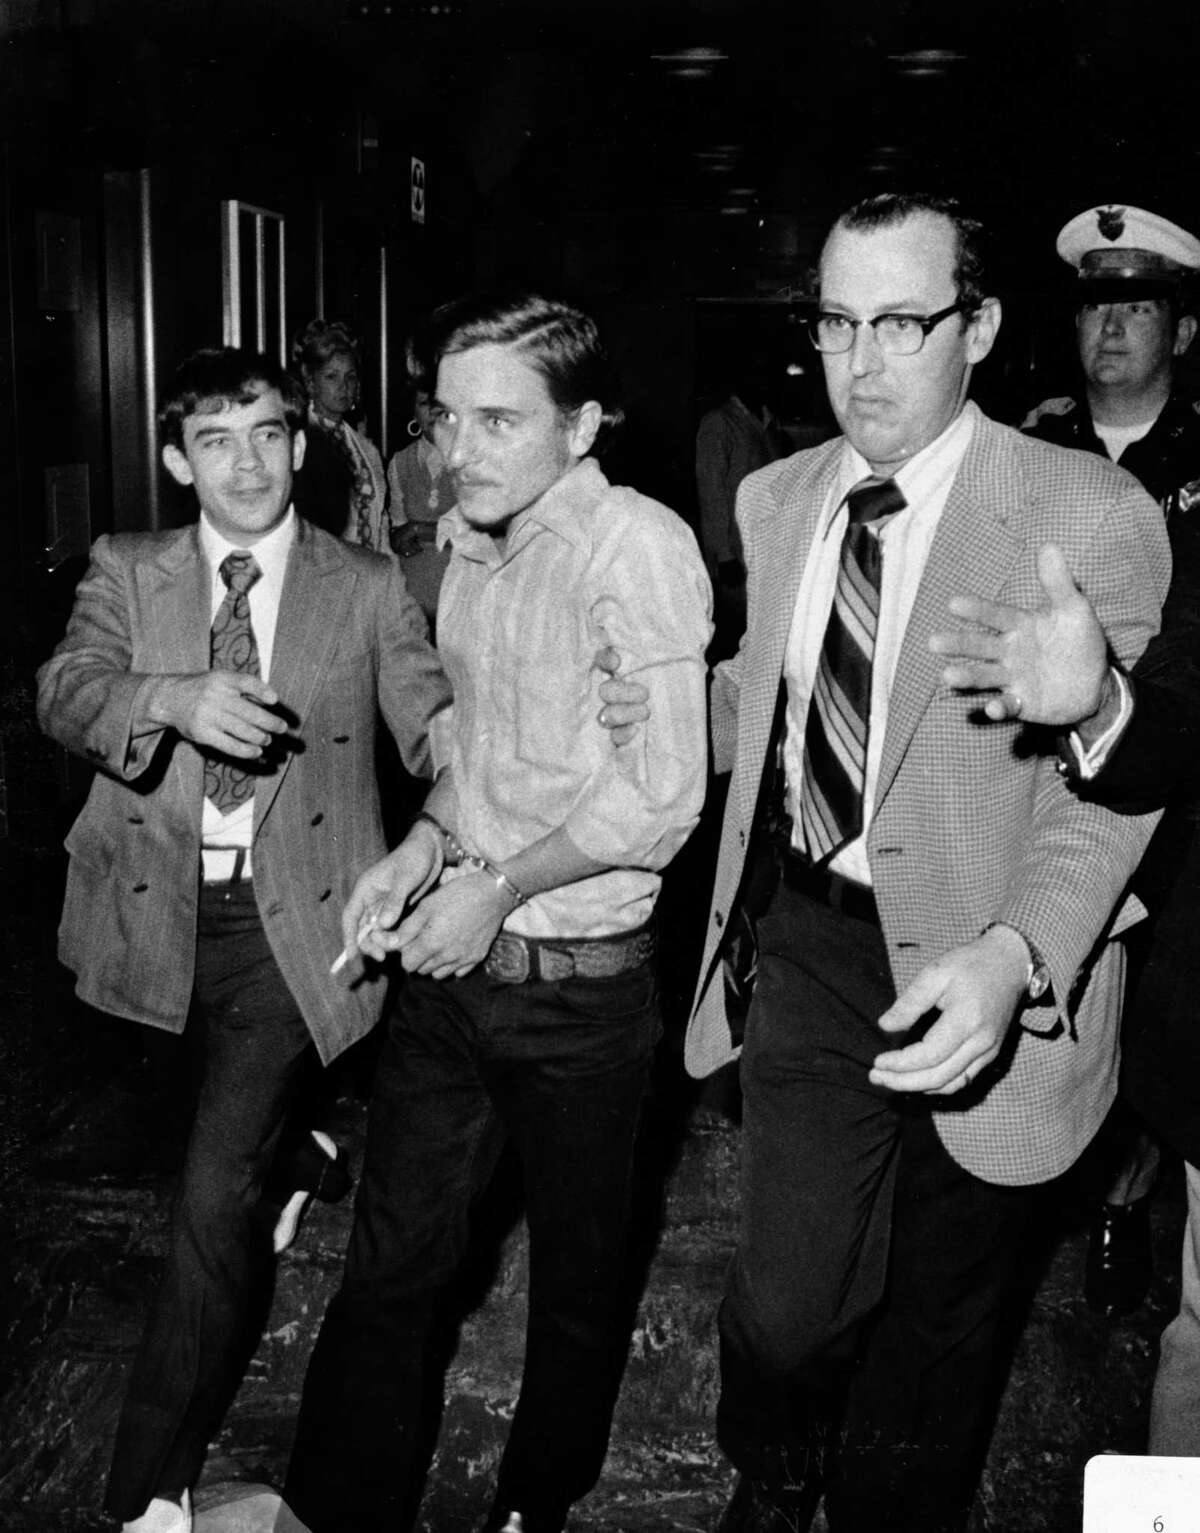 Aug. 13, 1973: A handcuffed Elmer Wayne Henley is escorted by police officers into a courtroom to face murder charges after he killed Dean Arnold Corll. Corll, who was known as The Candy Man, was a serial killer believed to have killed 28 teenage Houston boys, most of whom were lured by then-17-year-old Henley and a third teenage accomplice, David Owen Brooks. The murders came to light when Henley shot Corll Aug. 8, 1973. Henley is currently serving a 594-year sentence in the Texas State Penitentiary in Huntsville.